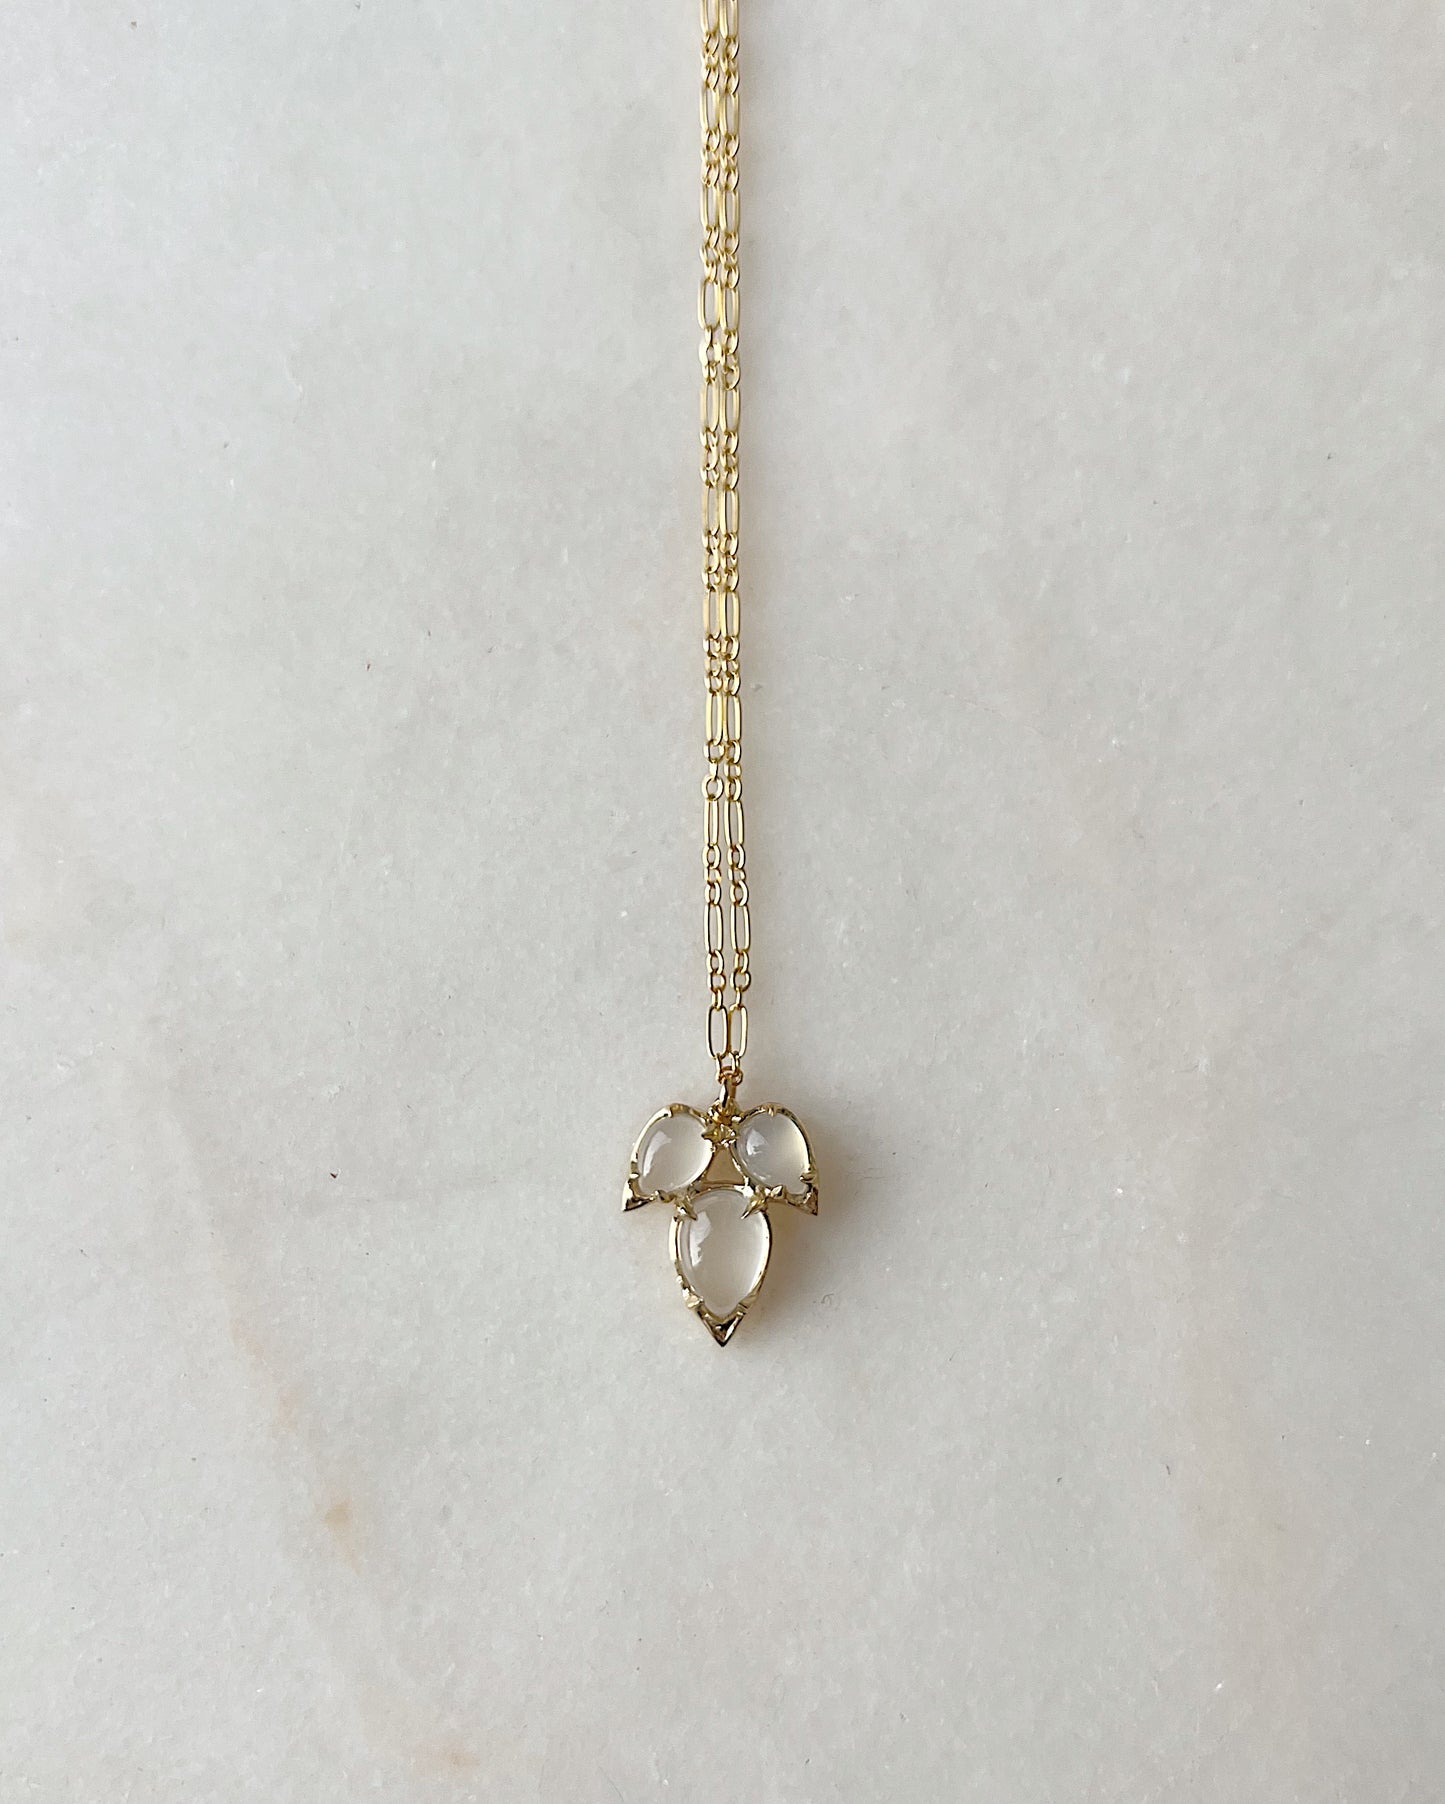 The Sharpest Thorn // 14k Gold // Necklace